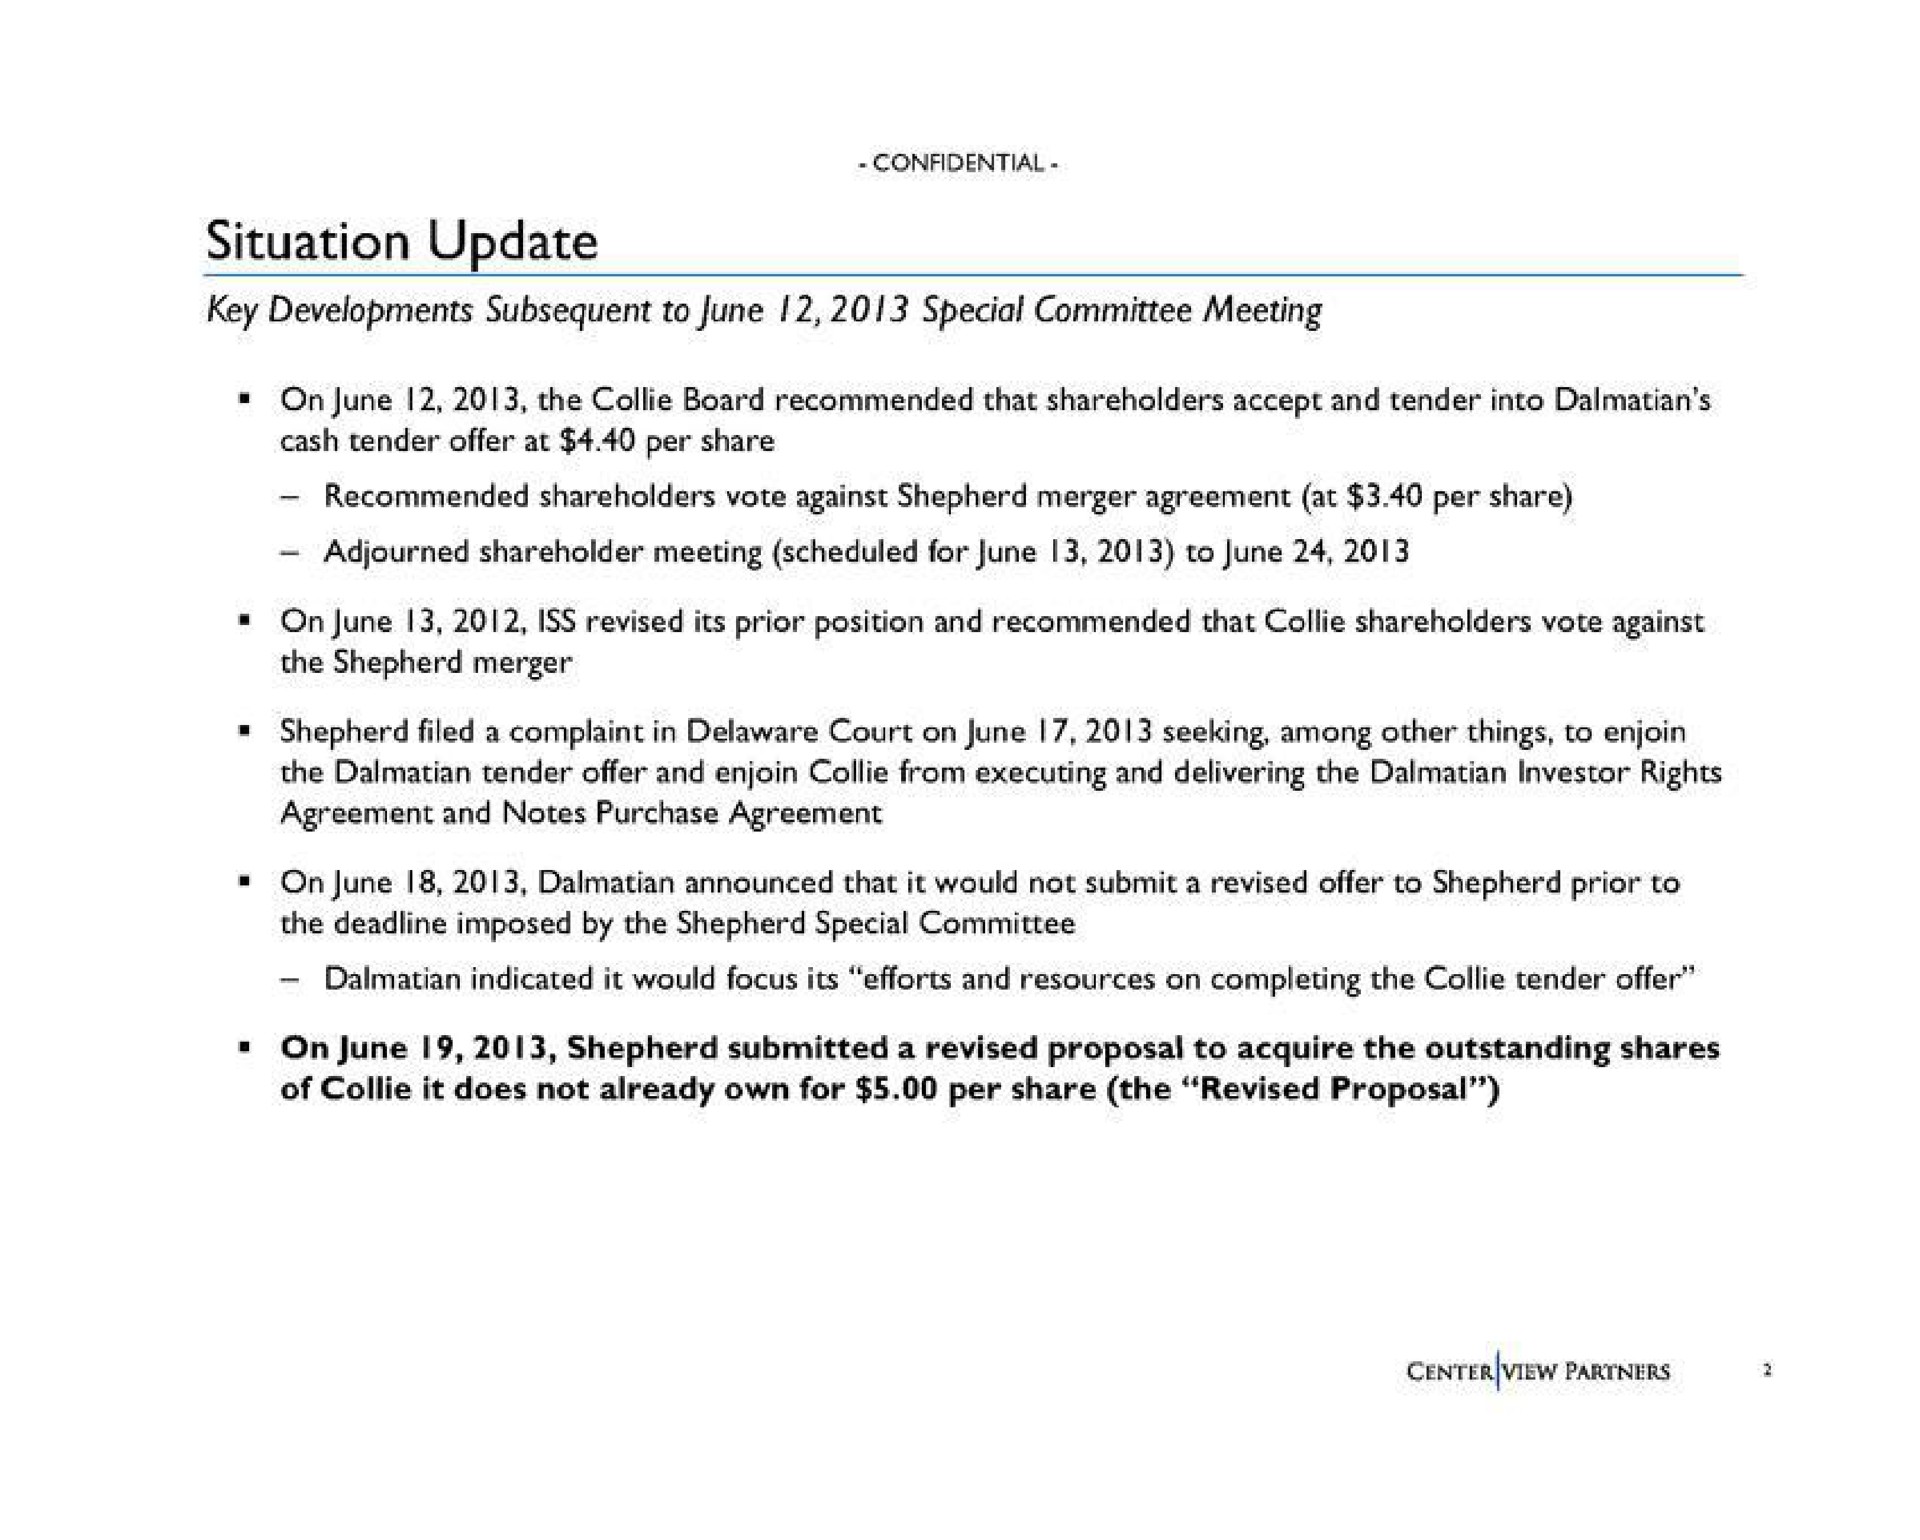 situation update key developments subsequent to june special committee meeting | Centerview Partners